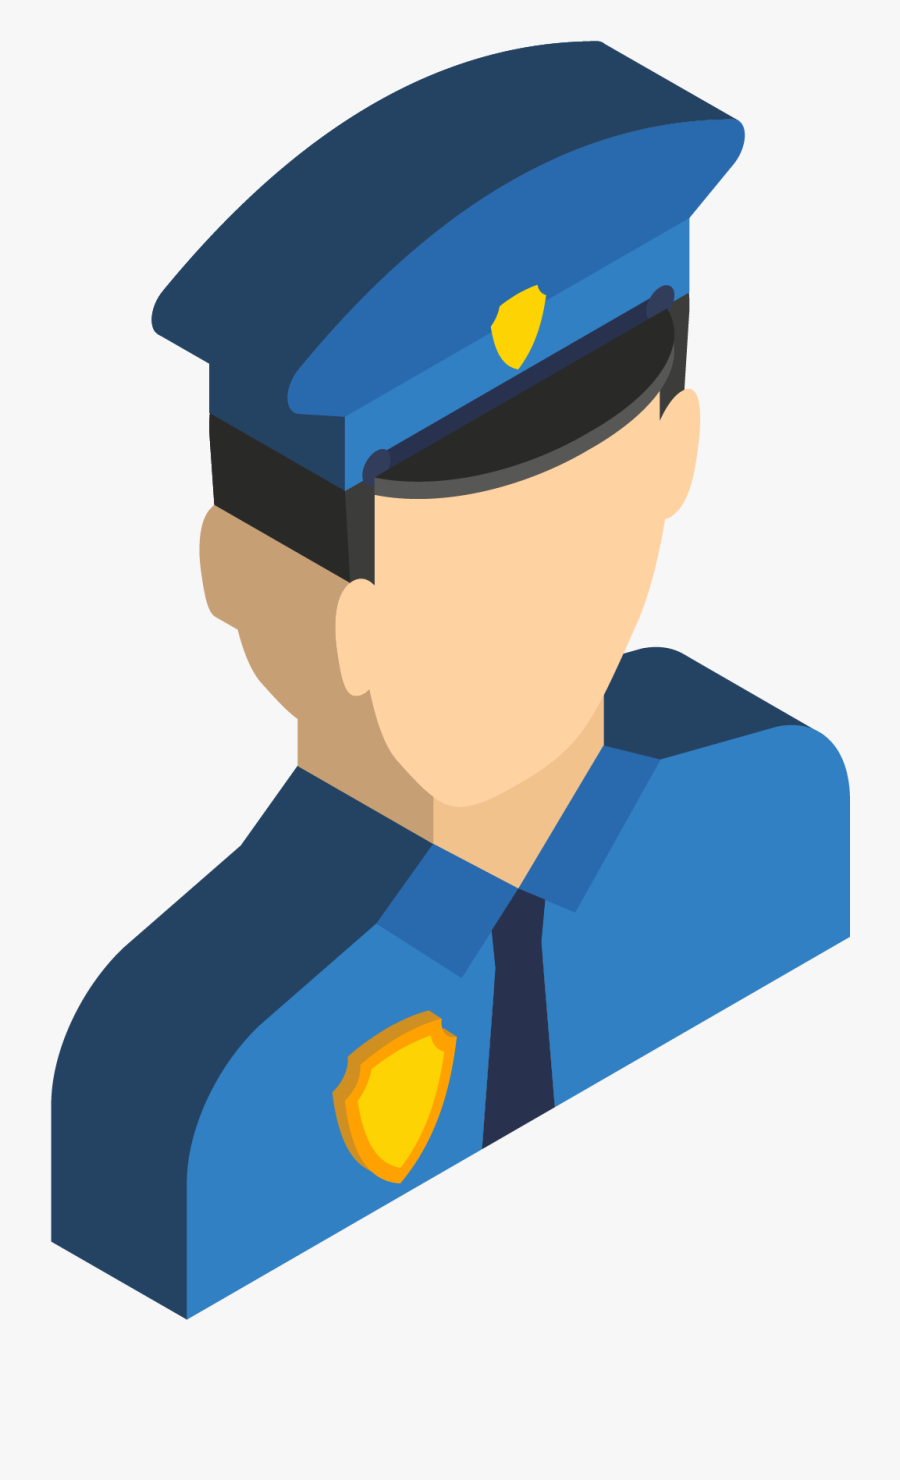 Men Police Employees Functions Png And Vector Image - Cartoon, Transparent Clipart